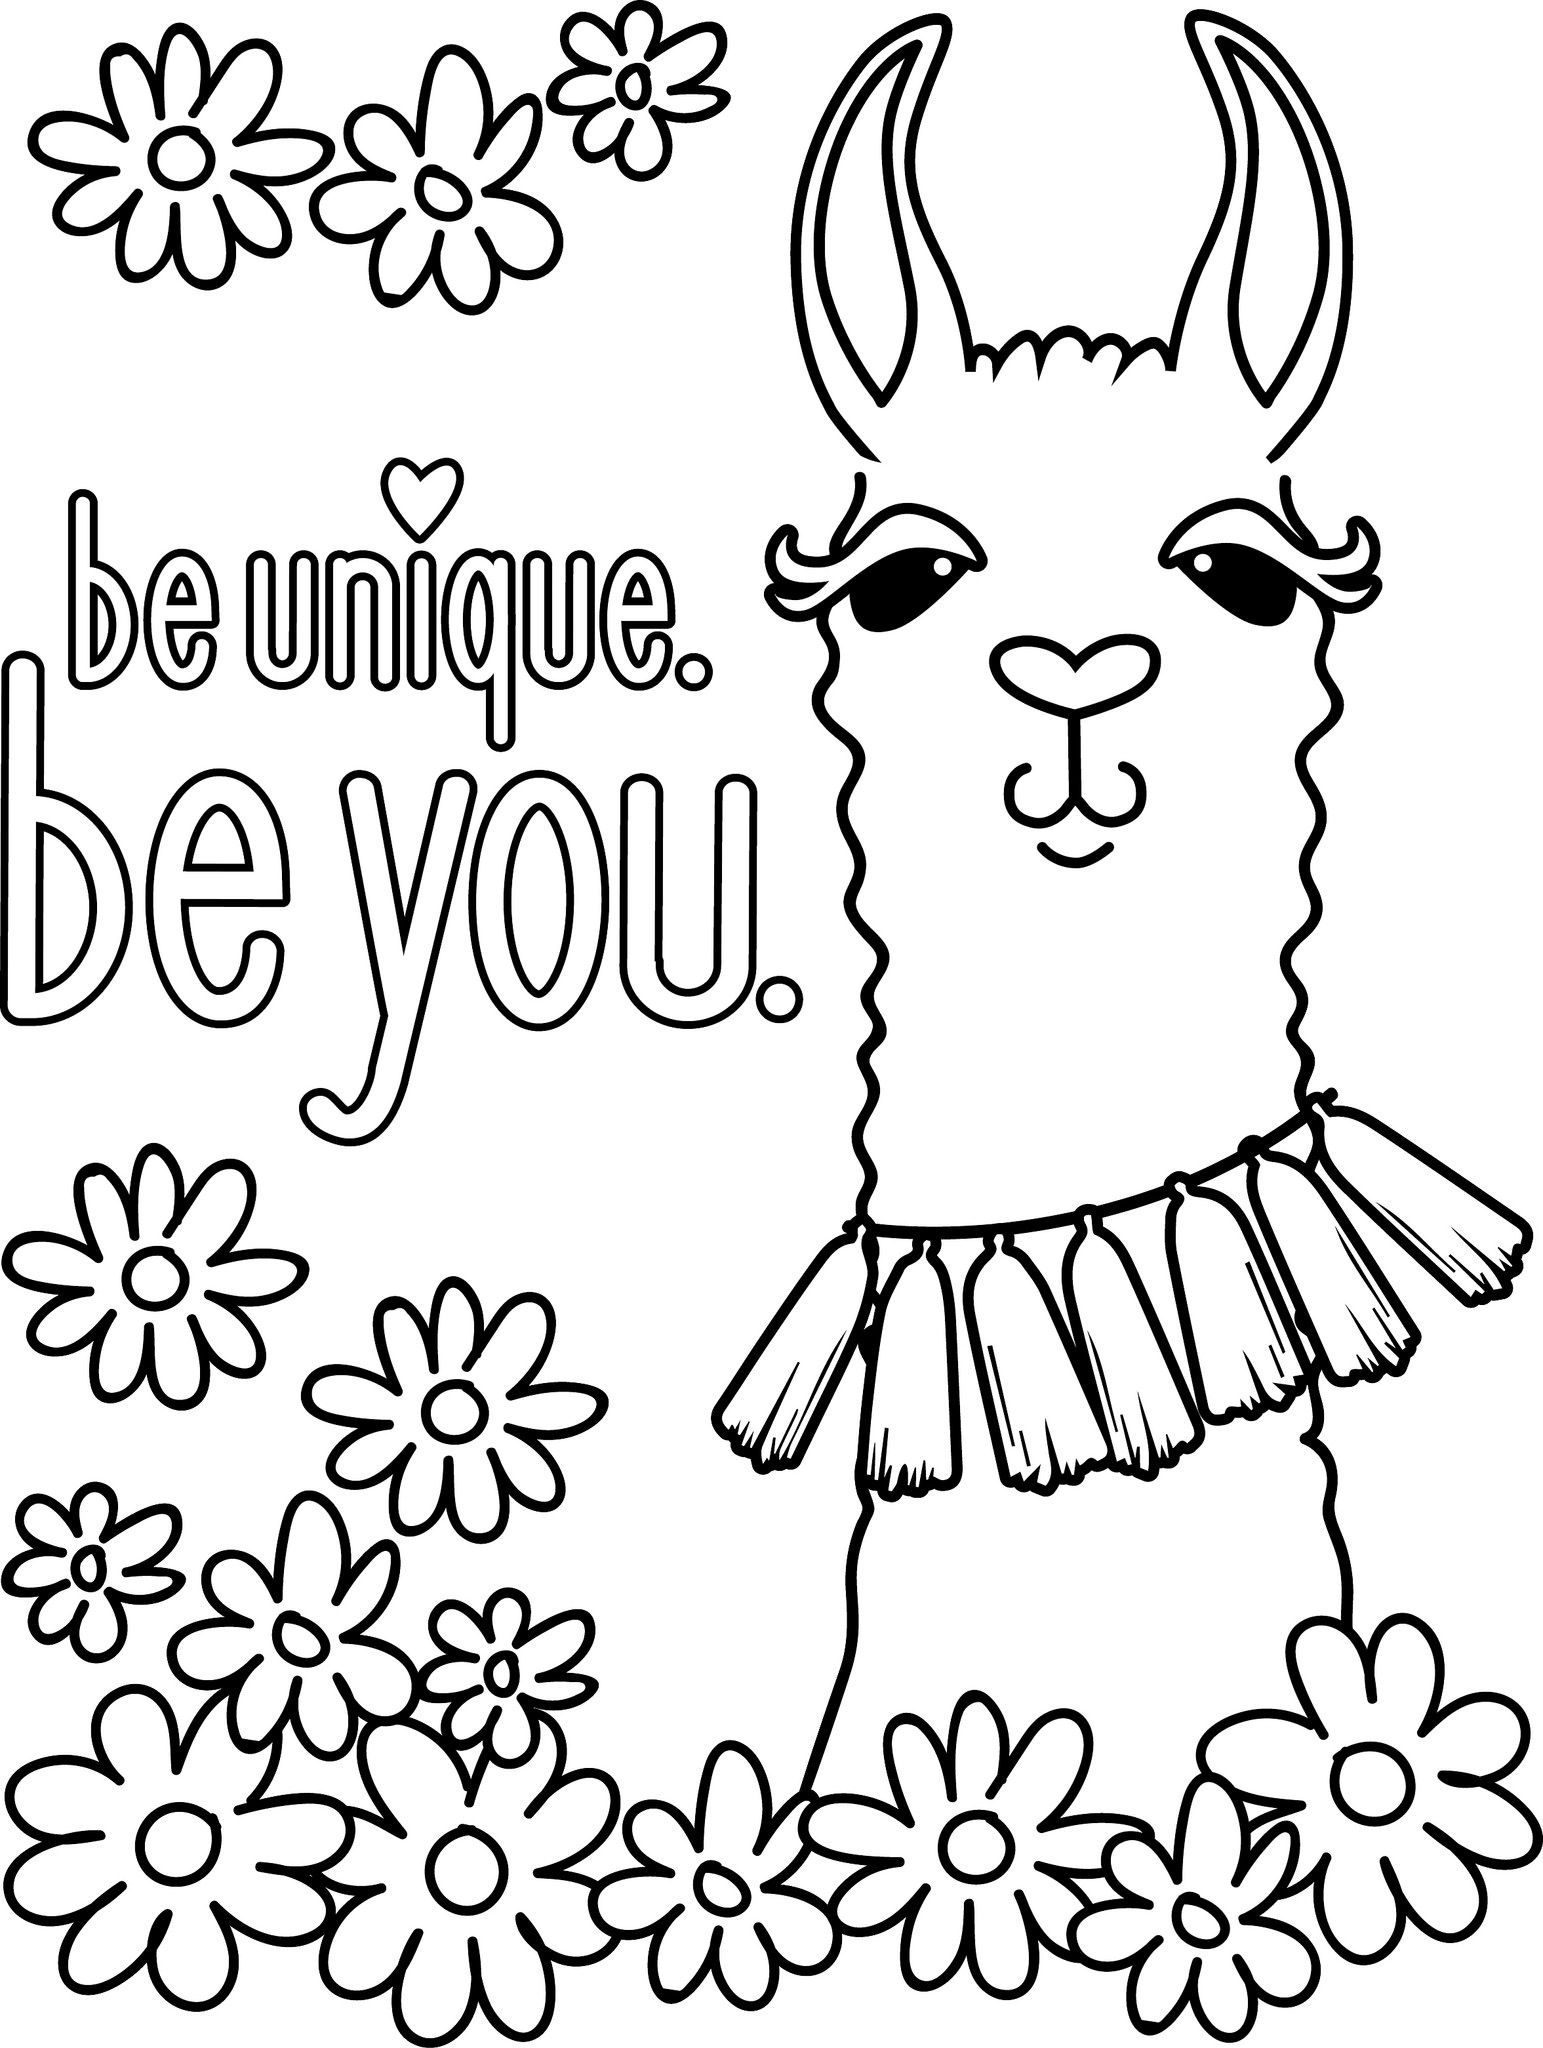 free-printable-llama-pictures-printable-word-searches